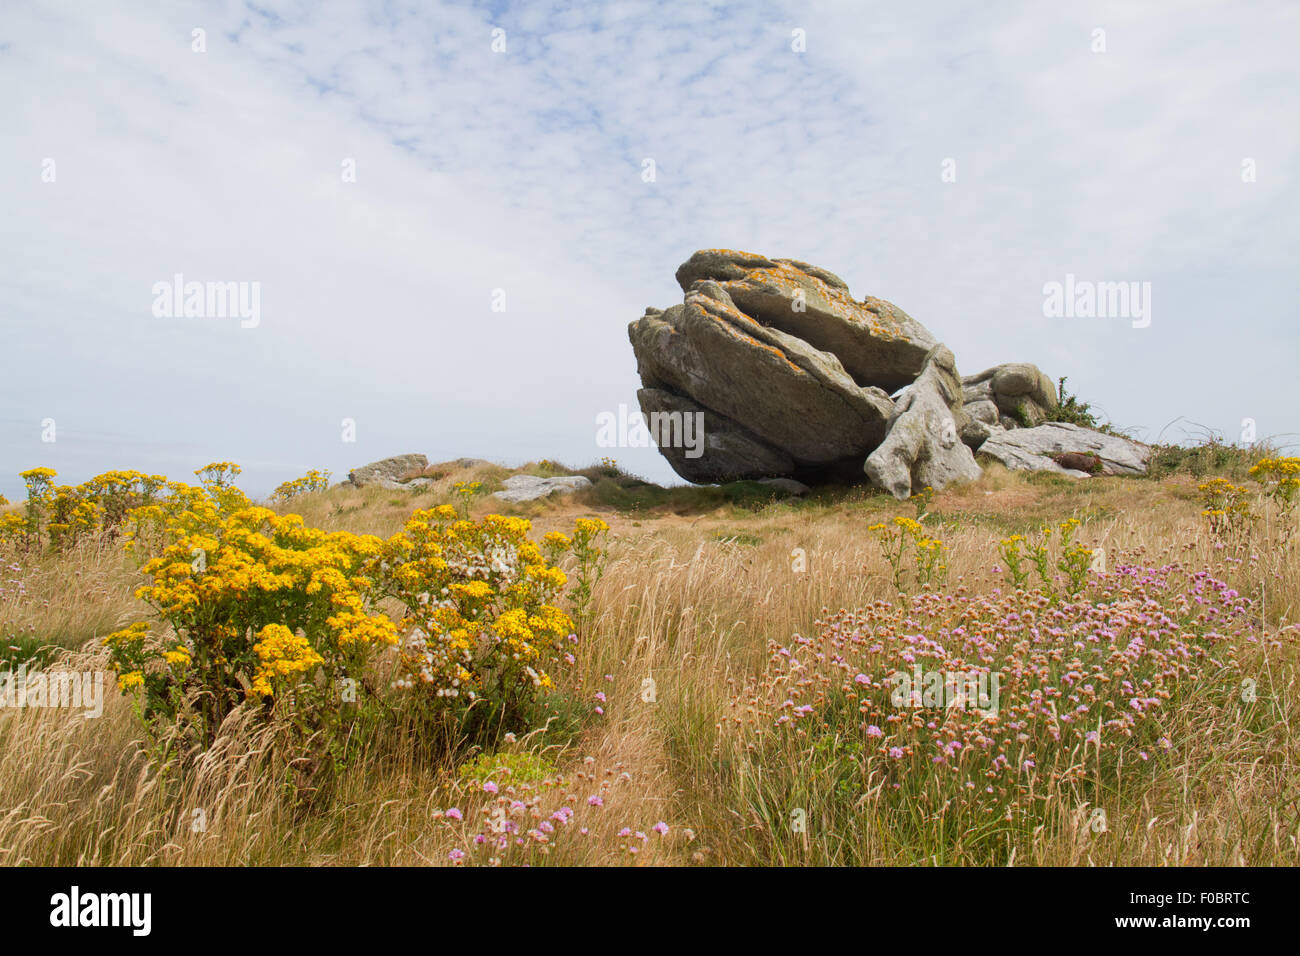 Eroded granite, a tor, also known as castle koppie, on the coast of Brittany, France. In the front Cushag and Marsh Daisy Stock Photo